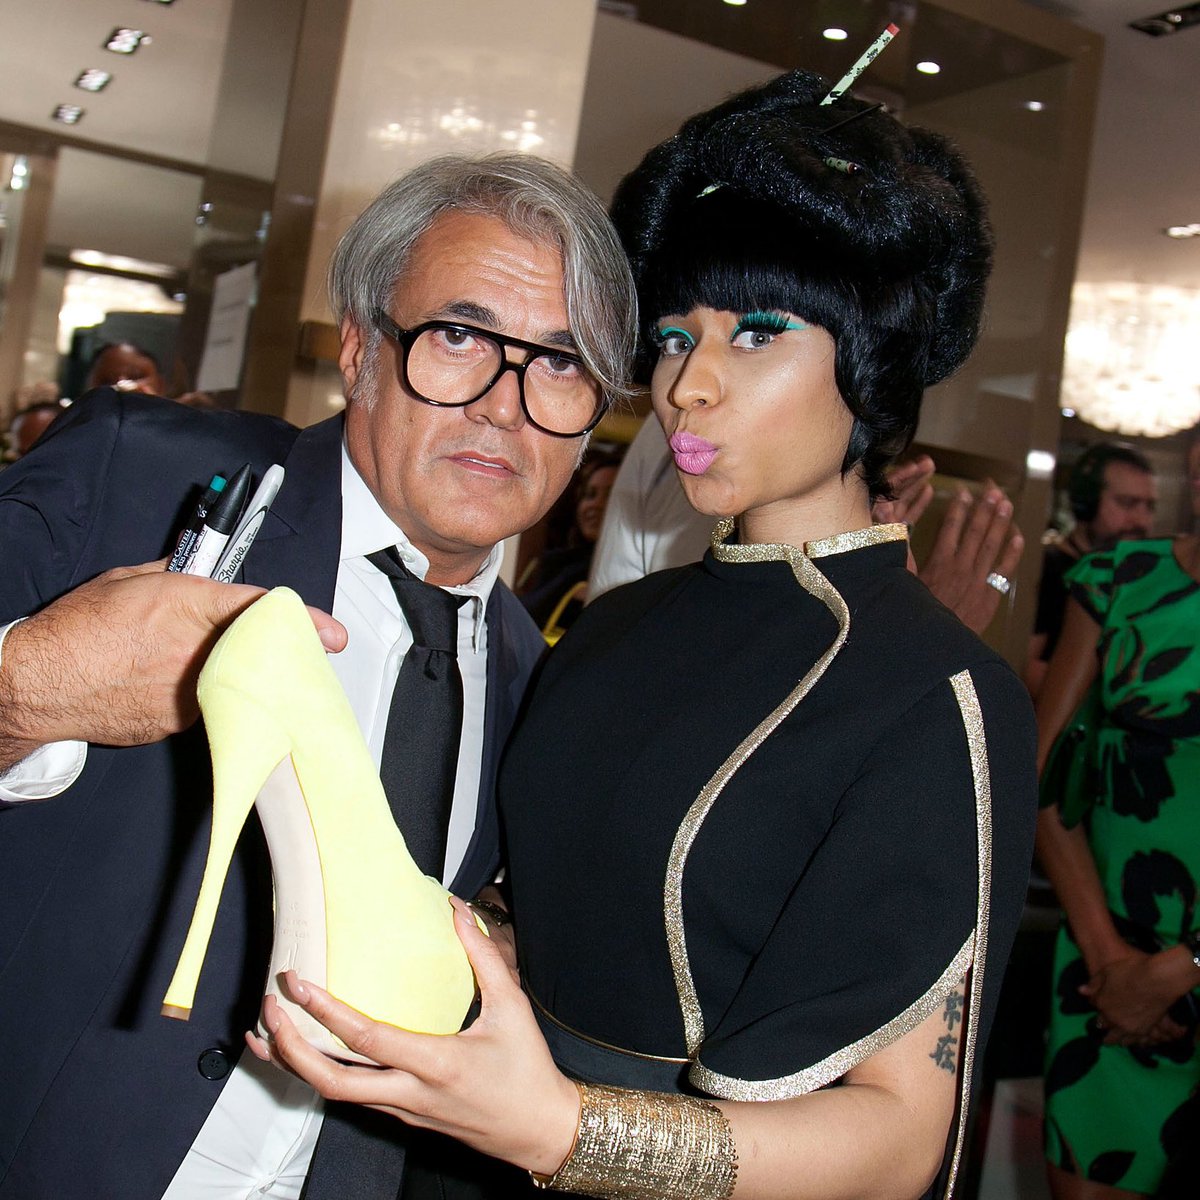 She owns rights to several designs on their line named after her. Zanotti’s publicists ghosted her when she attempted to make contact for future work & took her designs off their website. Nicki turned down cooperation with the brand due to what she saw as discrimination & sexism.